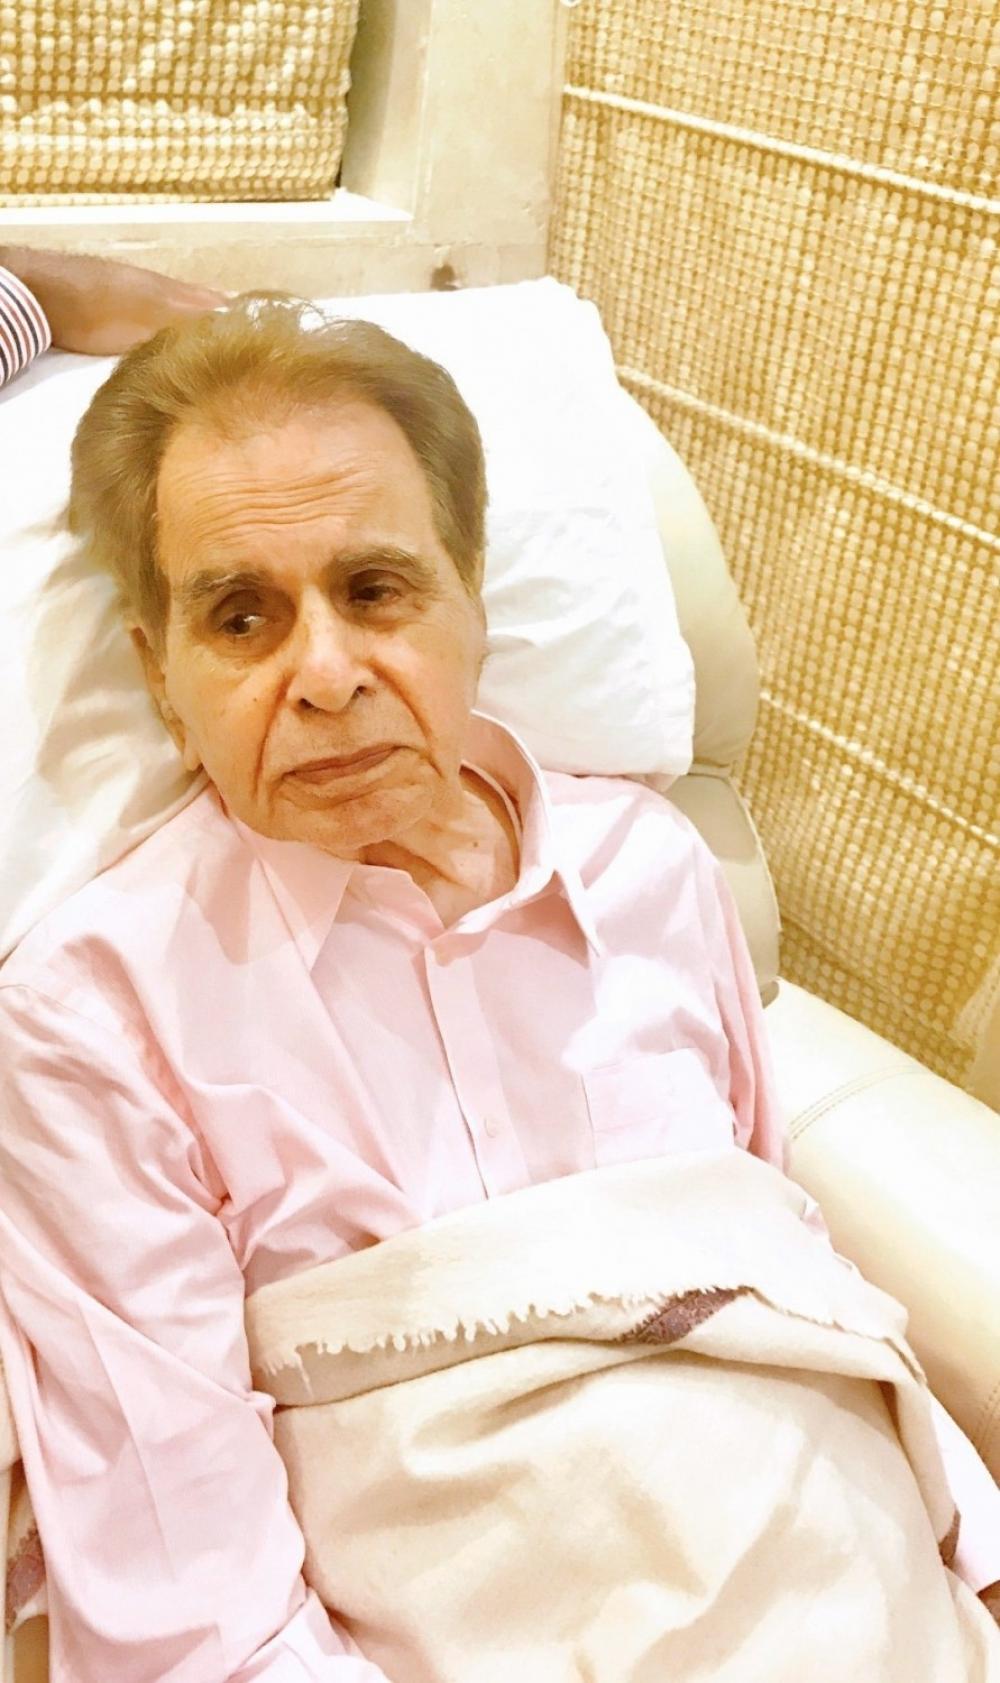 The Weekend Leader - Dilip Kumar discharged from hospital